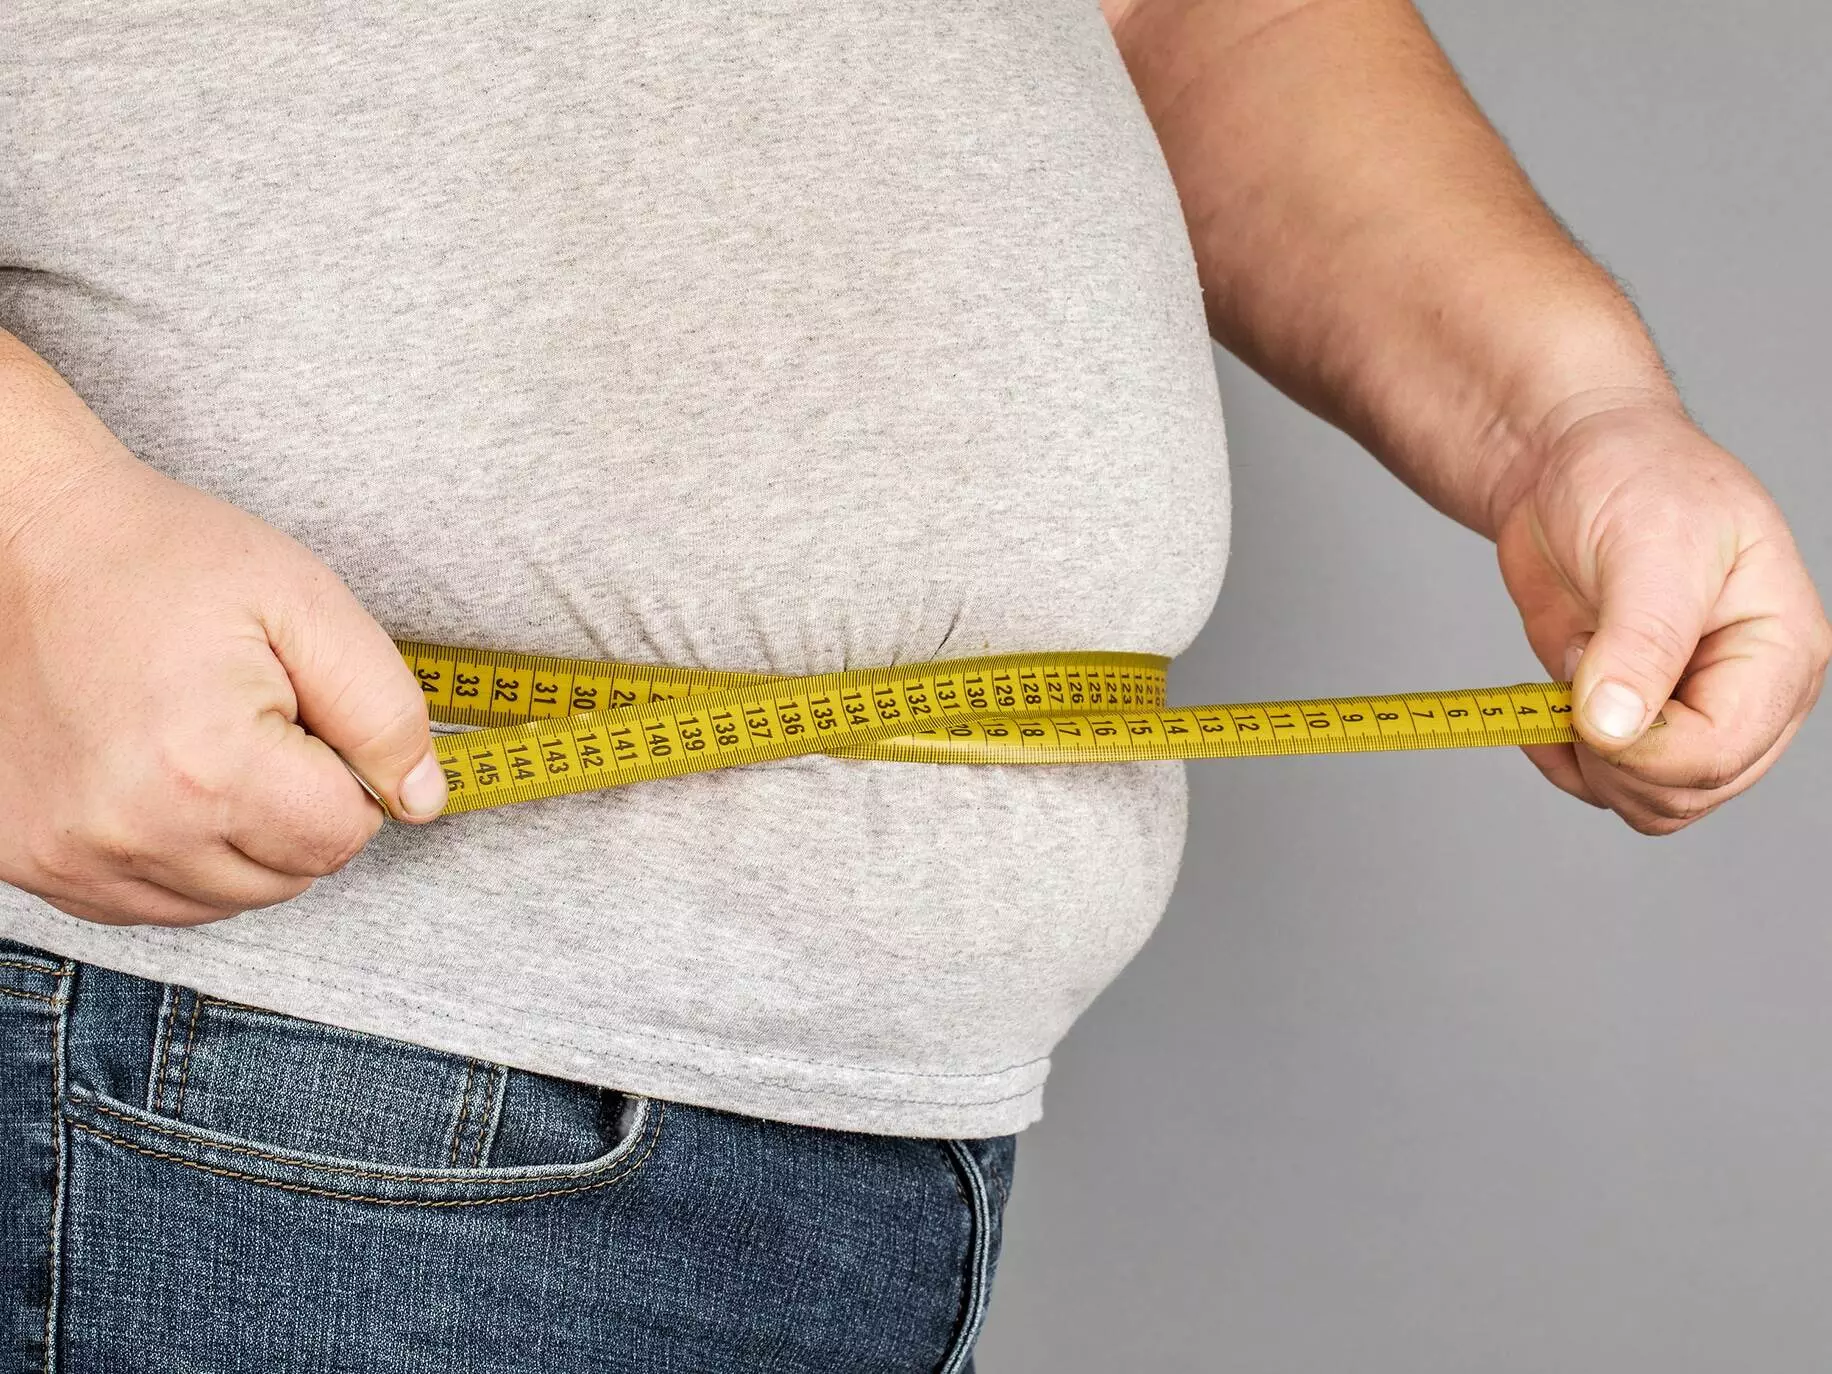 Hepassocin levels may be effective for detecting insulin resistance in obese patients with PCOS: Study